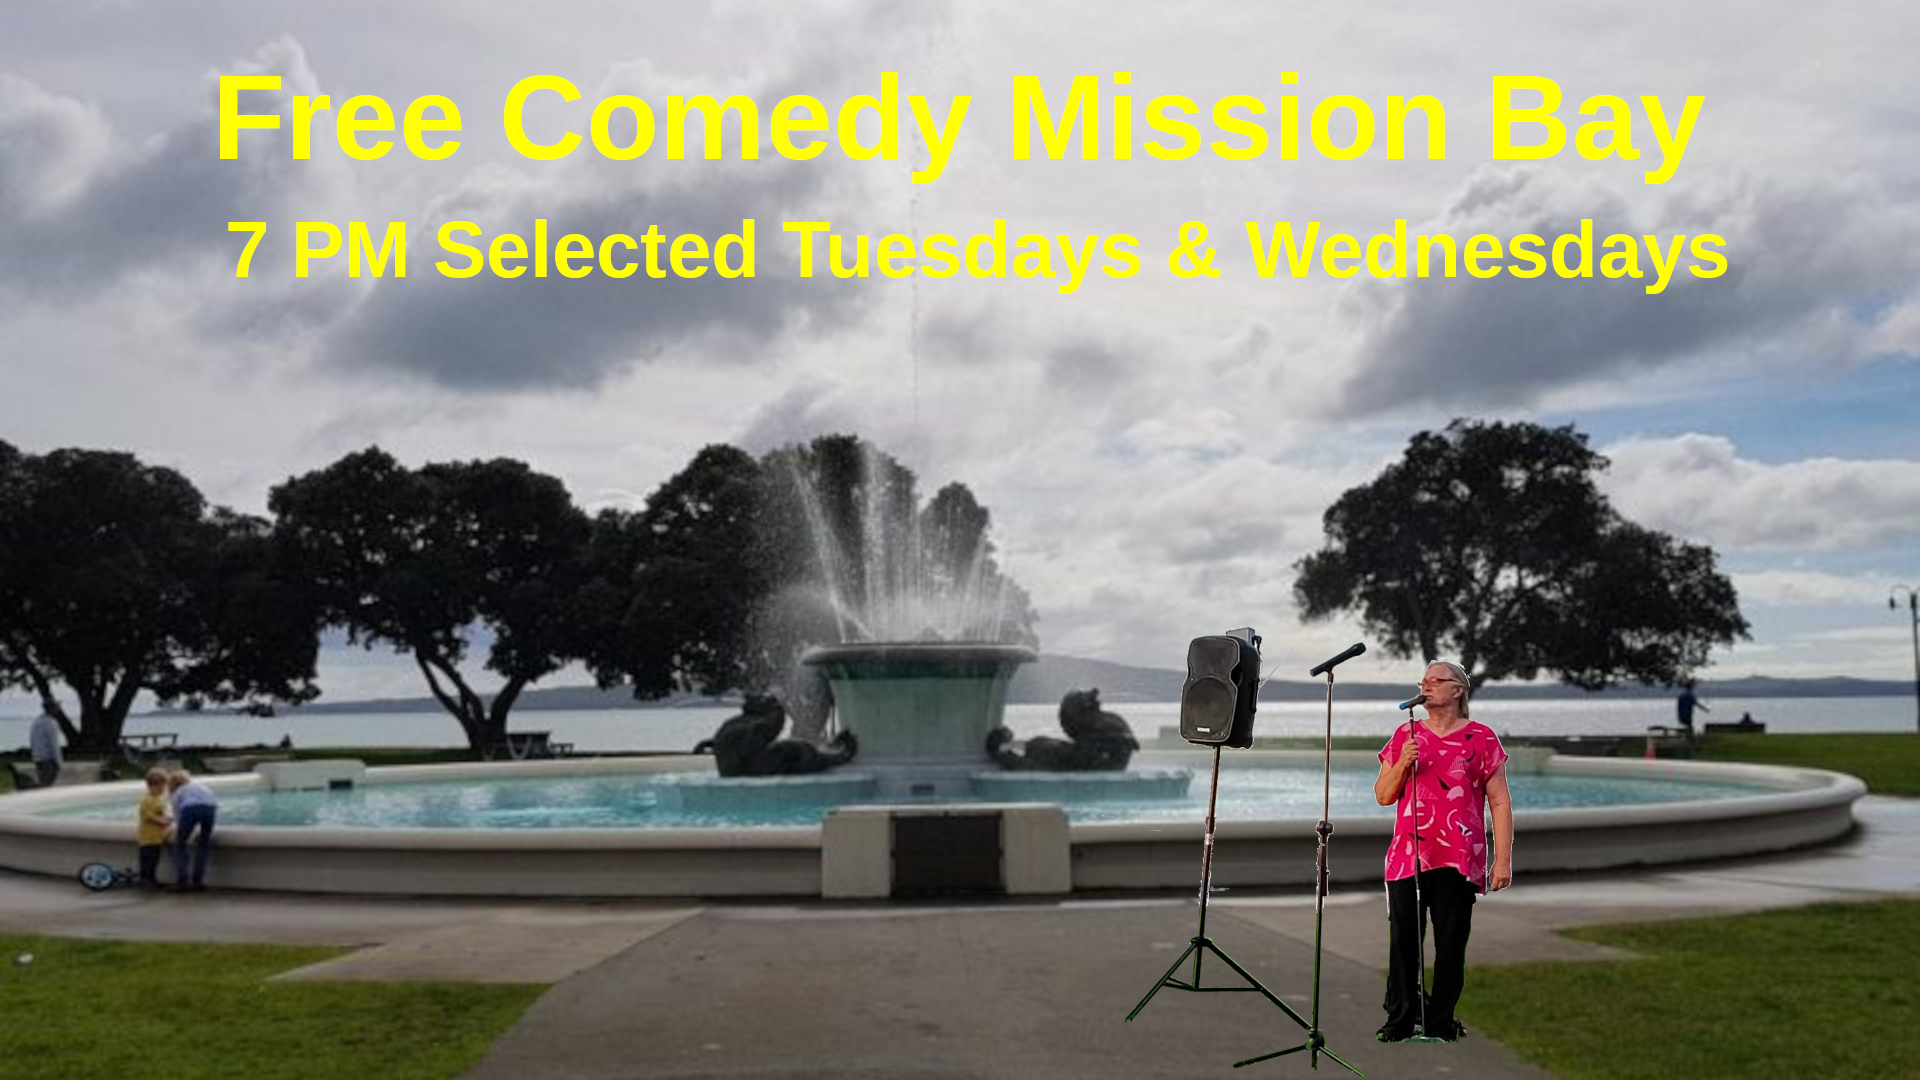 A comedian stands in front of a fountain with a microphone and loudspeaker. Text: Free Comedy Mission Bay 7 PM Selected Tuesdays & Wednesdays